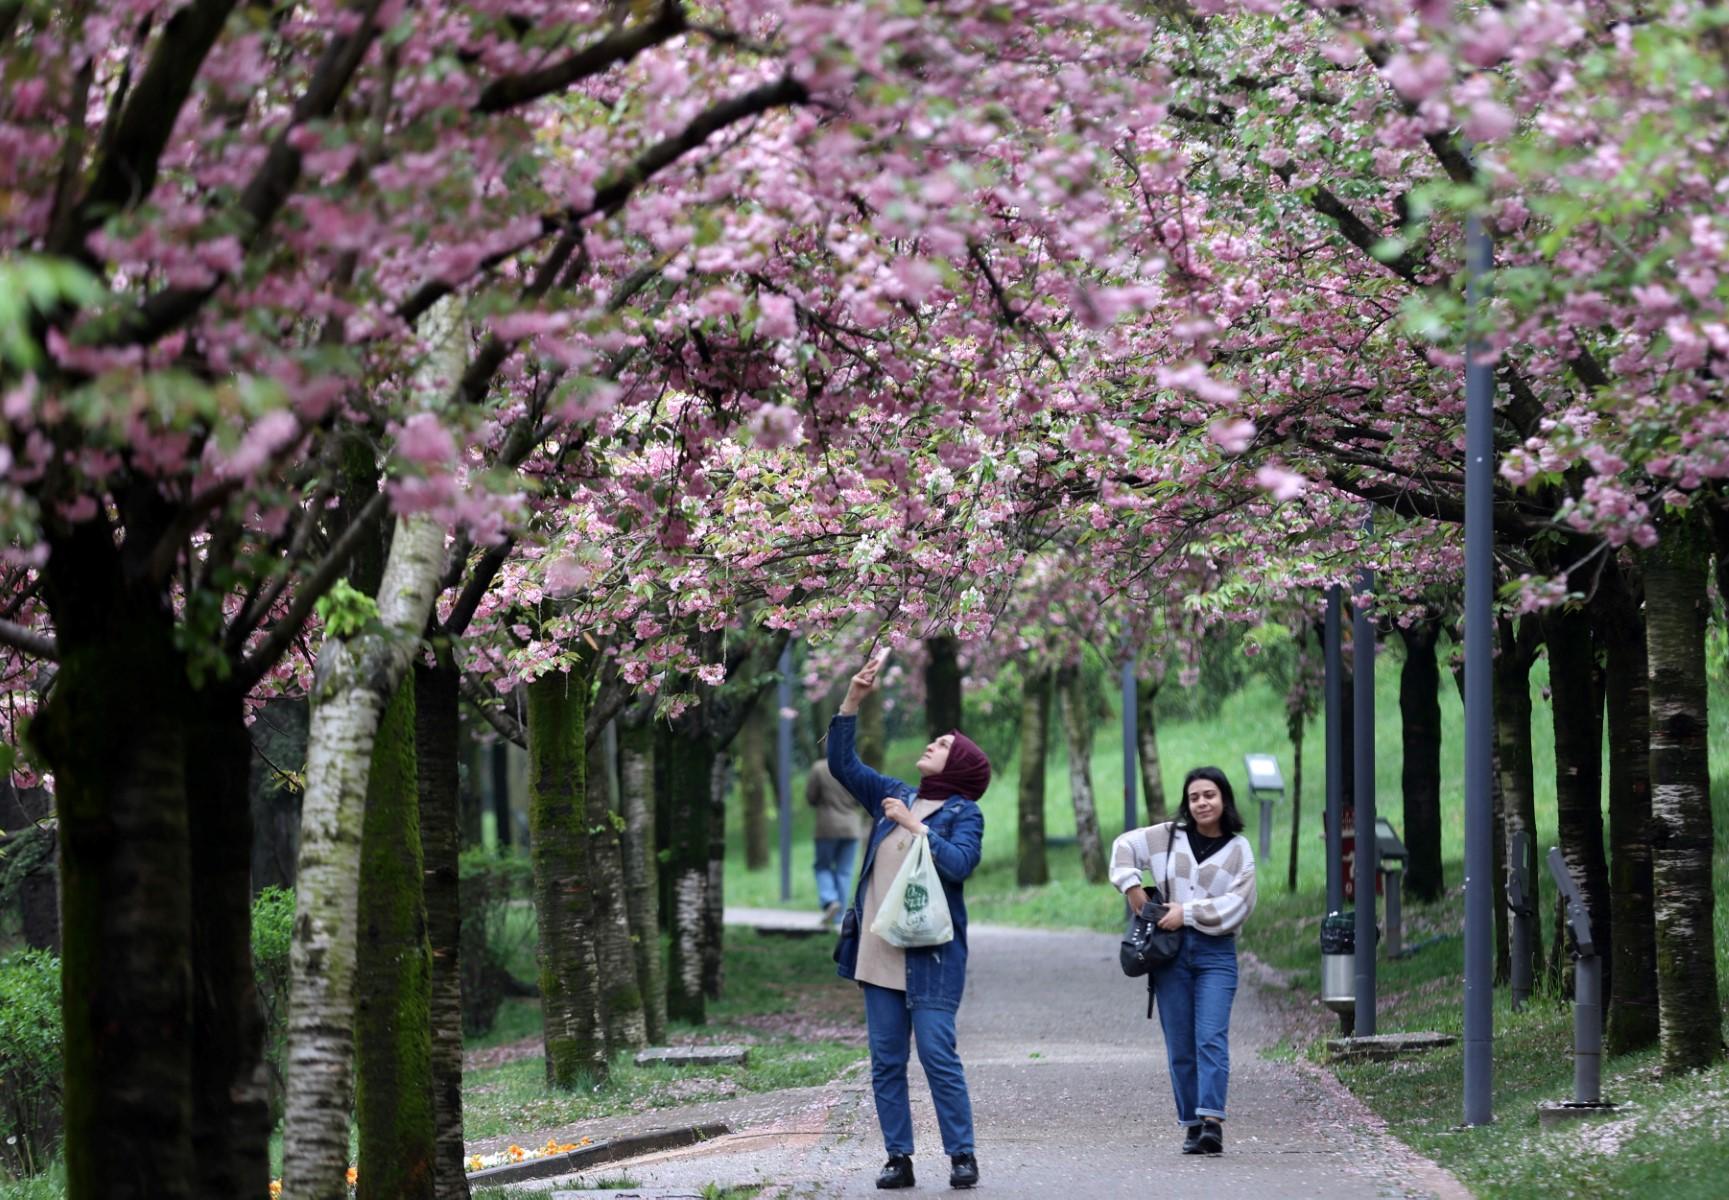 A woman uses her mobile phone to take a photo during a walk through the park to see the cherry blossom in Dikmen Valley in Ankara on May 4. Photo: AFP